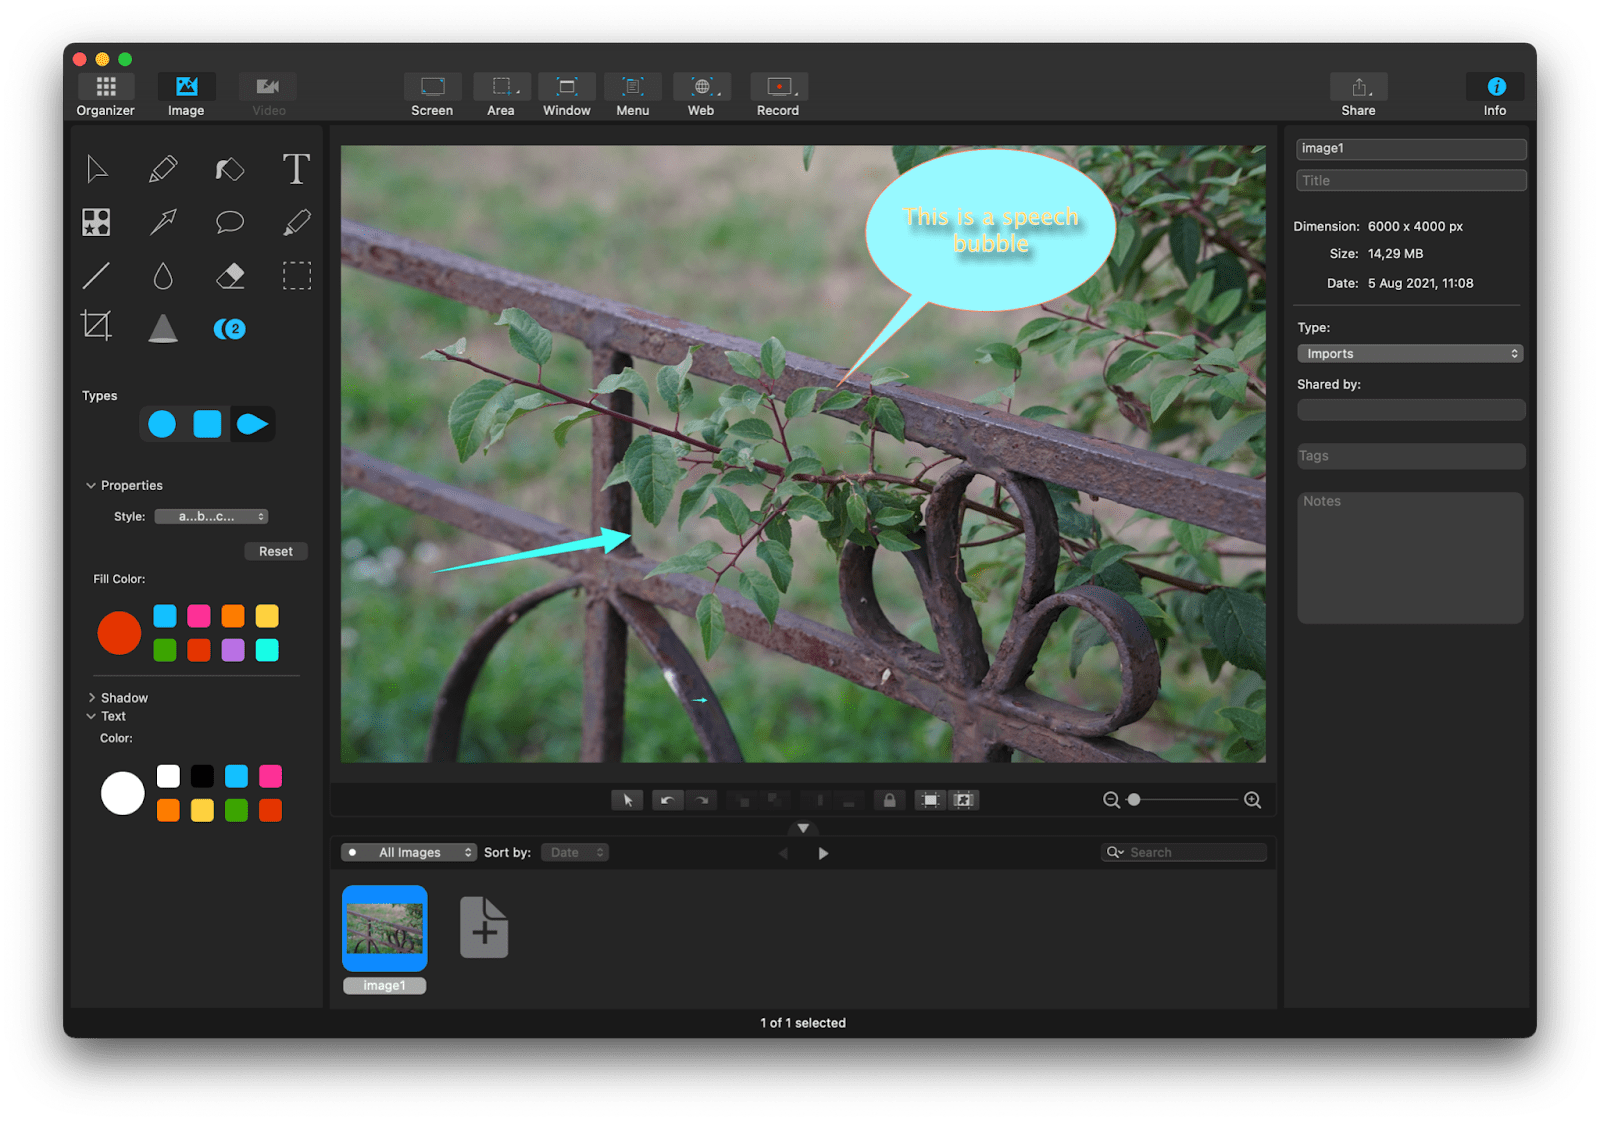 photo editor app for pc that begins with the word photo